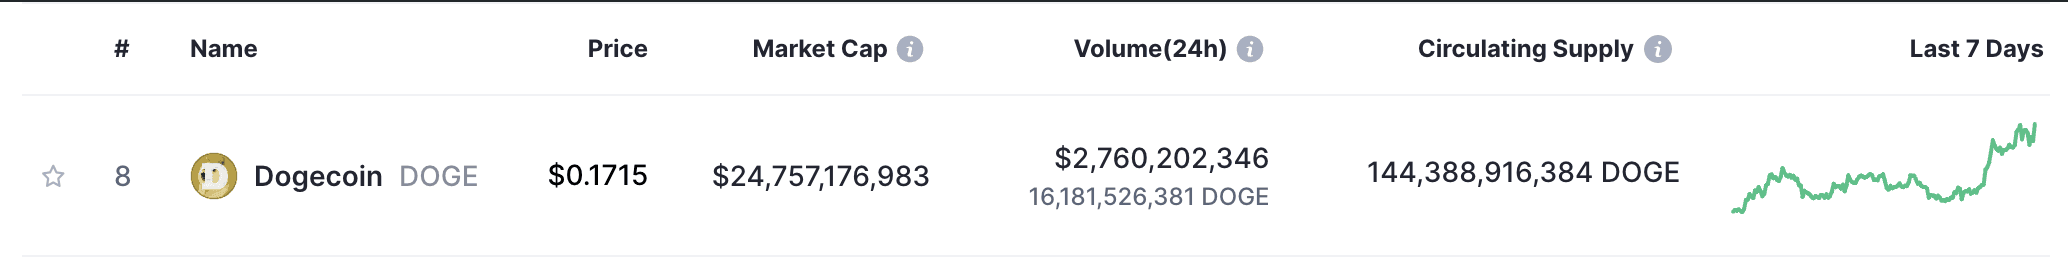 $DOGE coin with a market cap of $24.7B and a daily volume of $2.7B